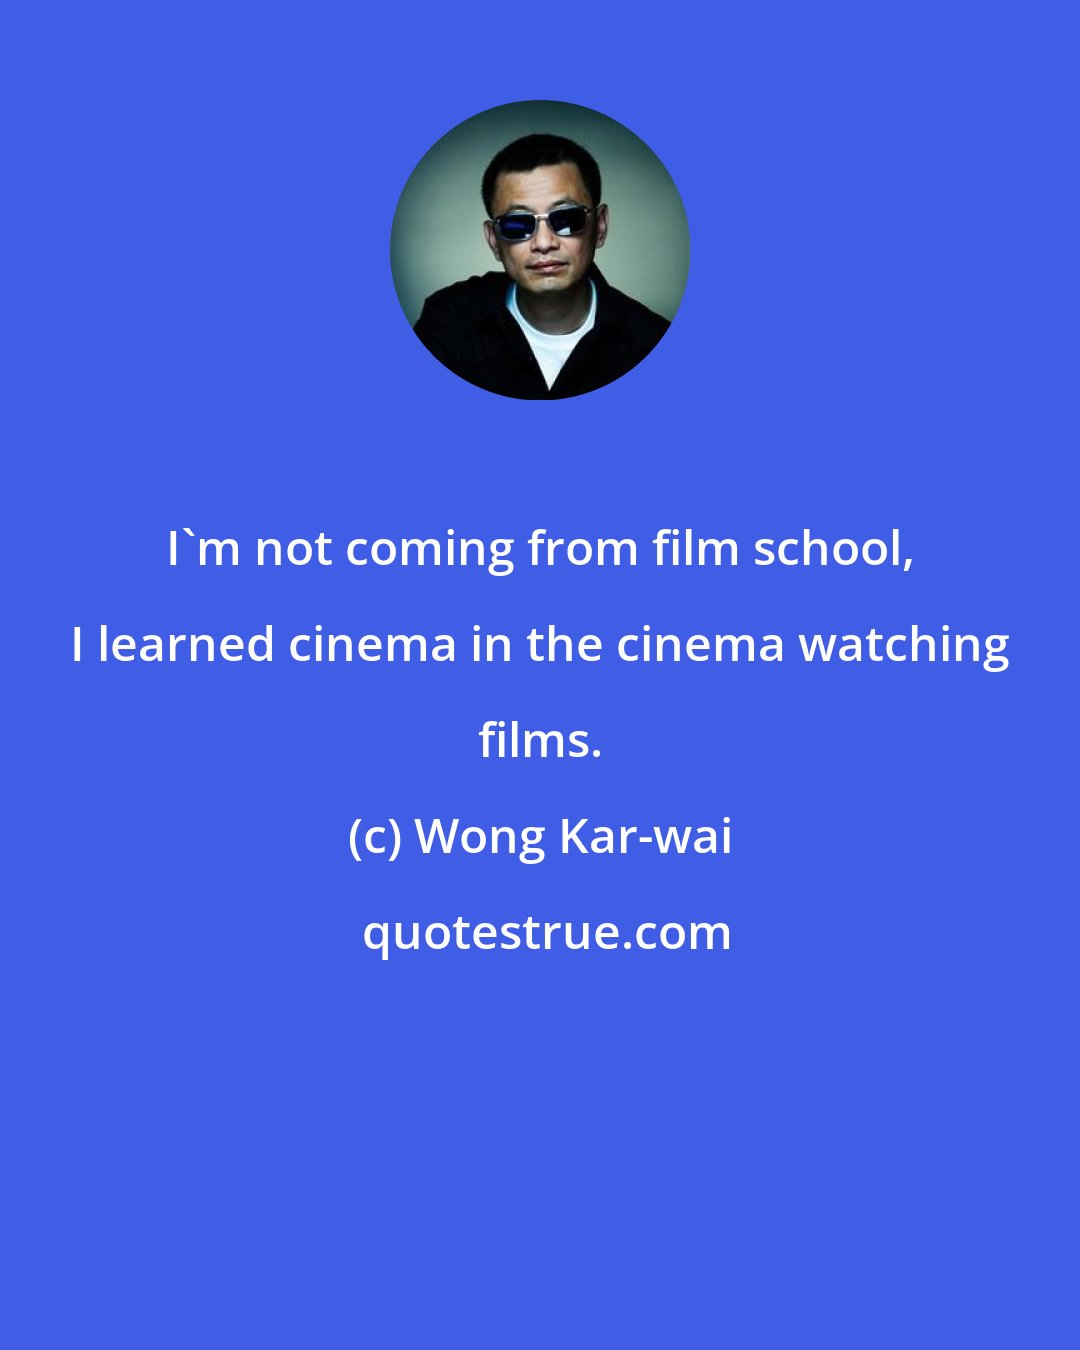 Wong Kar-wai: I'm not coming from film school, I learned cinema in the cinema watching films.